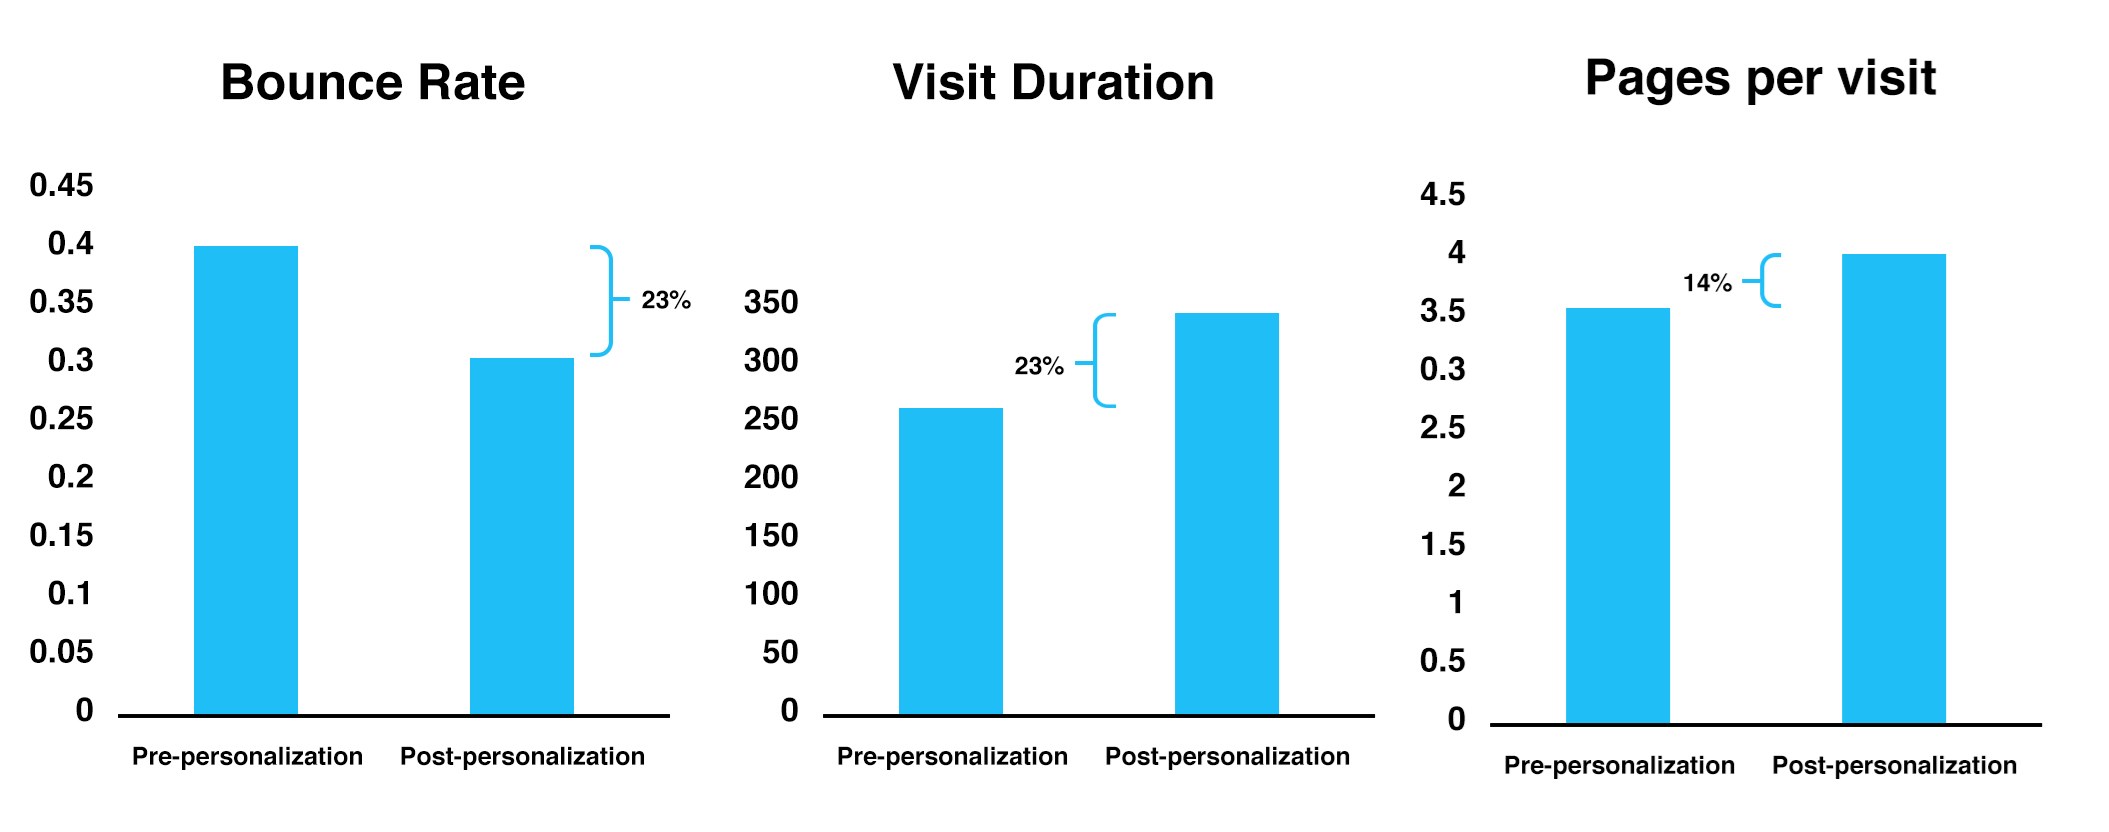 Measuring the impact of personalization